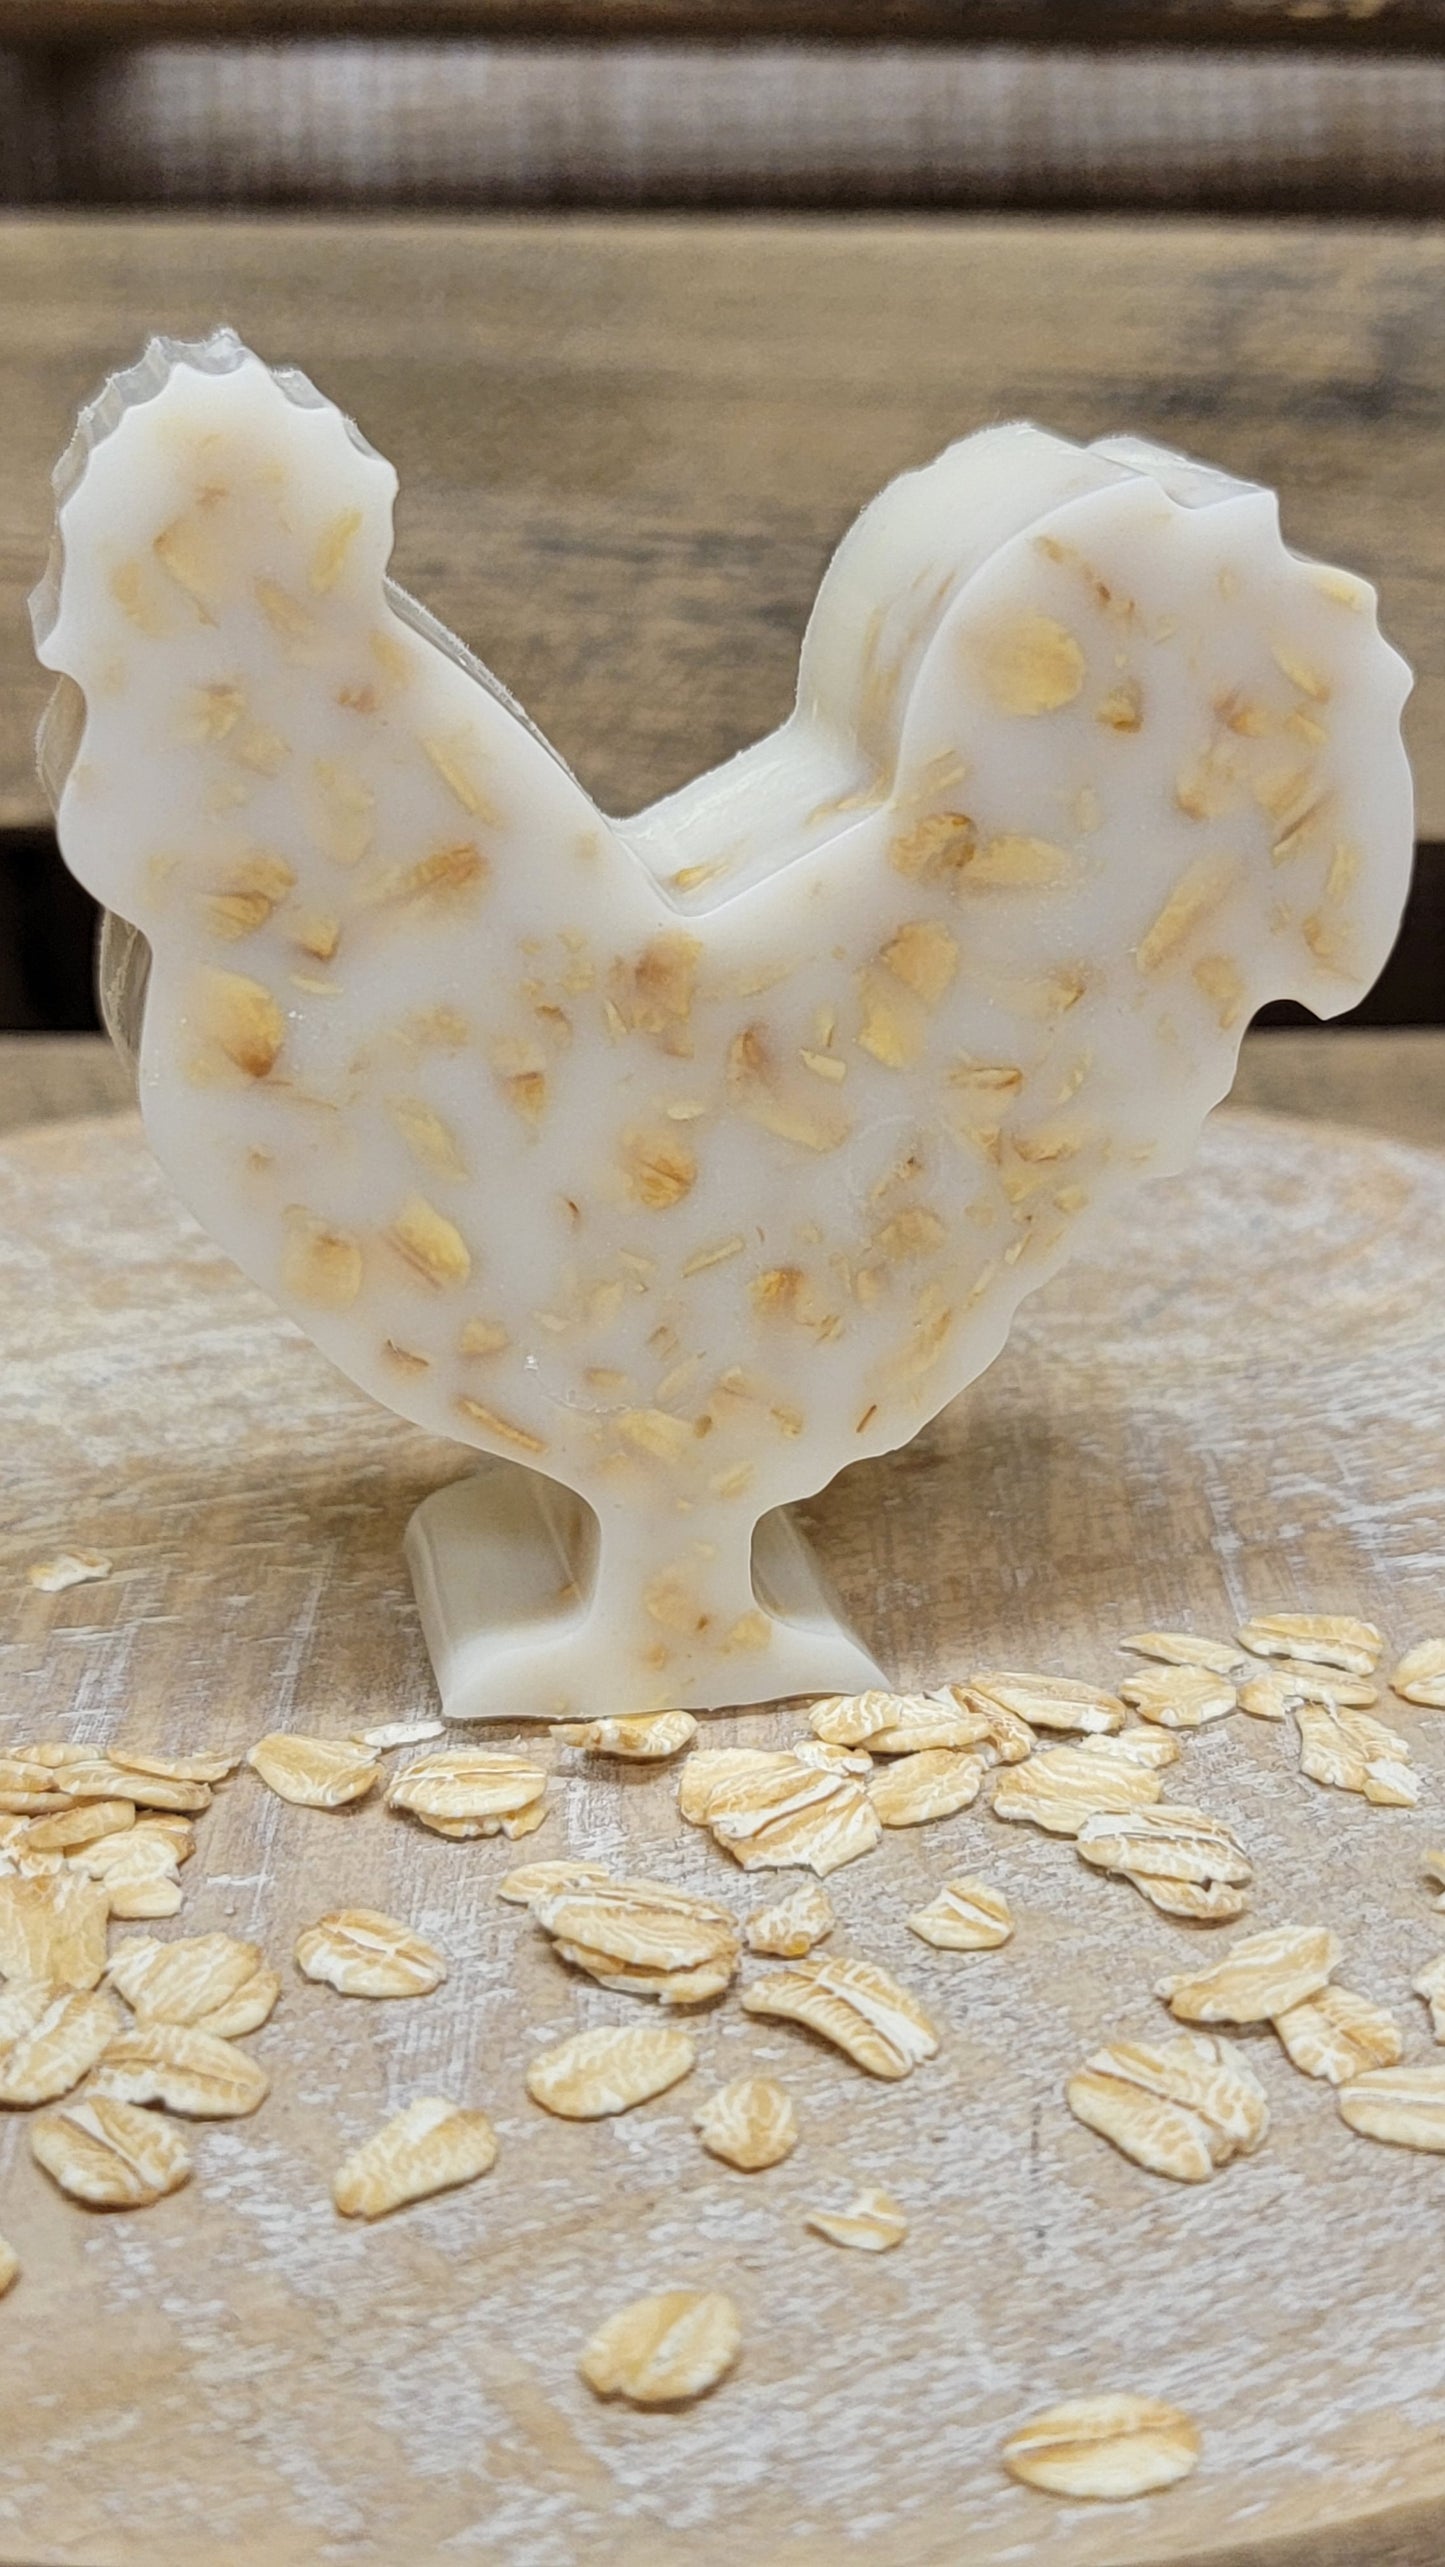 Purebred Goat Milk Soap With Organic Oats - Fun Shapes